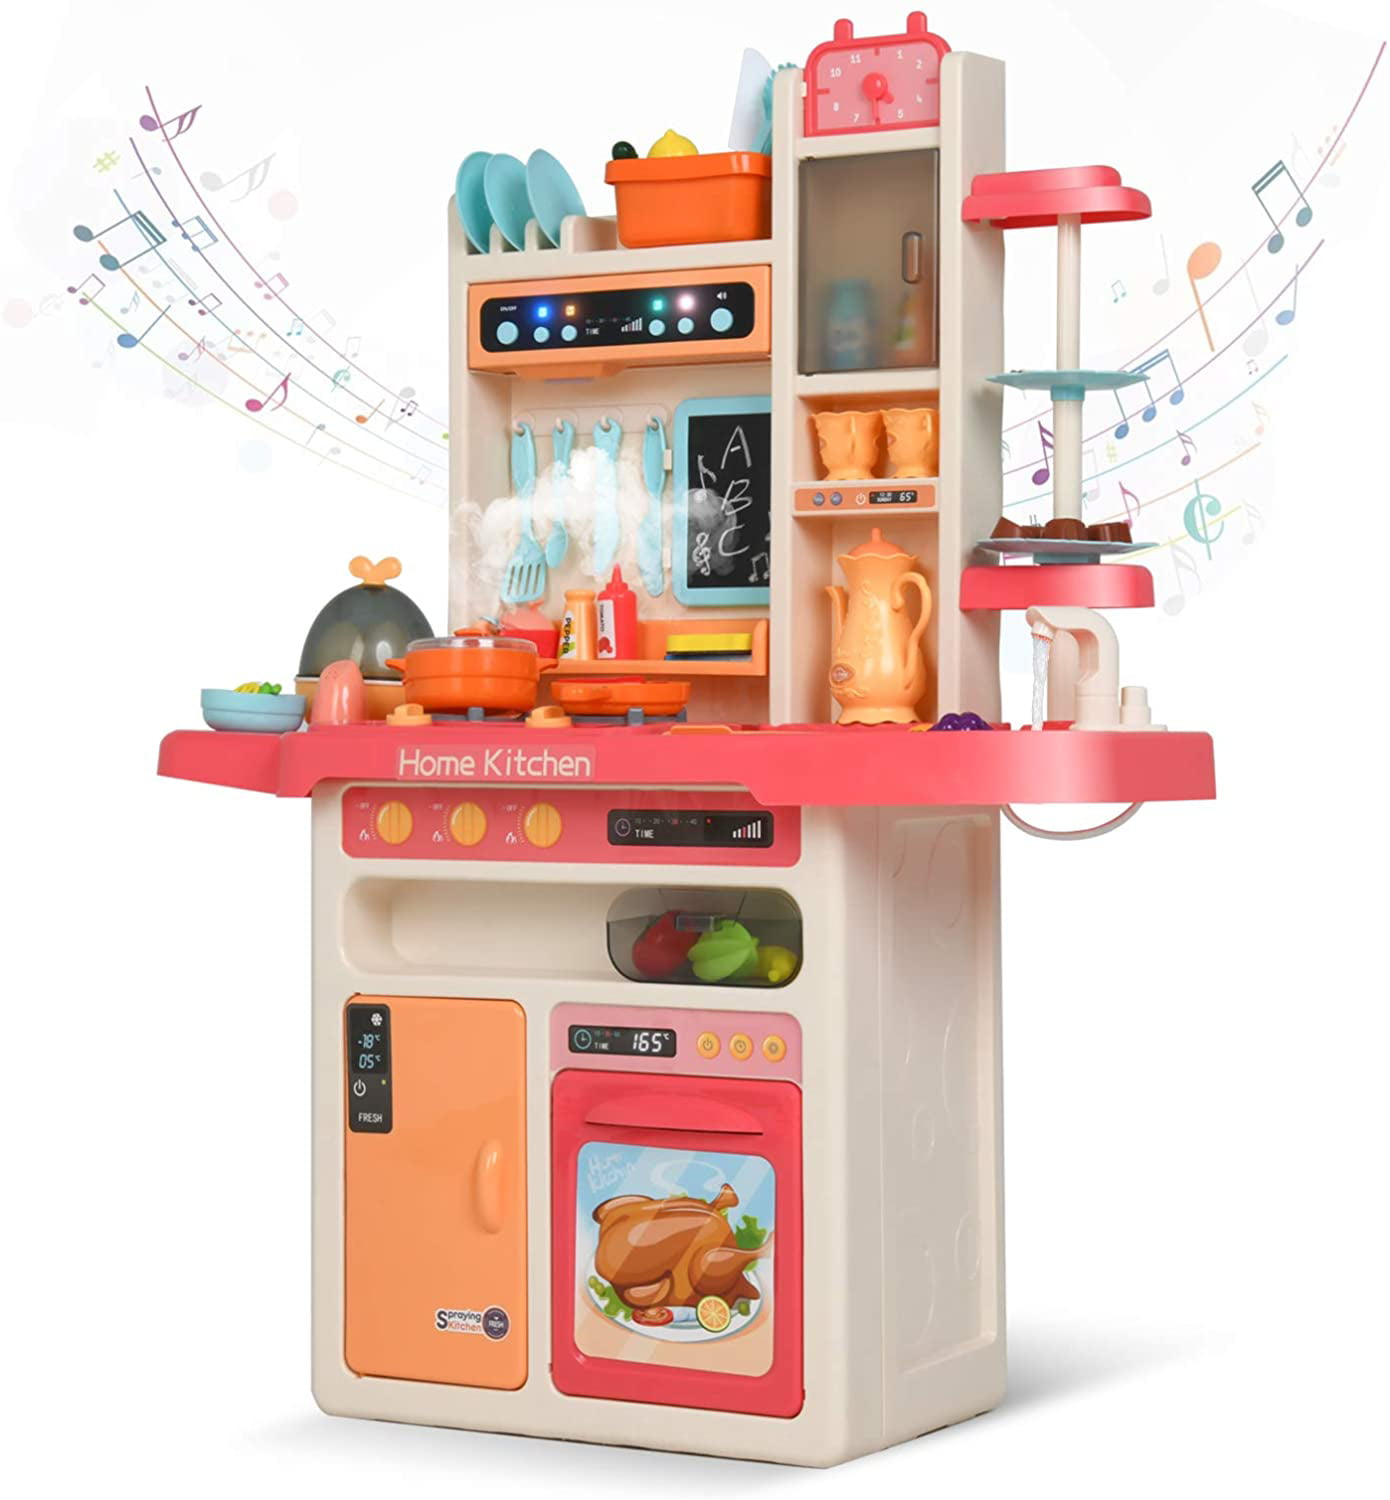 PLAY AT HOME PLAY KITCHEN WITH LIGHTS AND SOUNDS KITCHEN ACCESSORIES NEW BOXED 